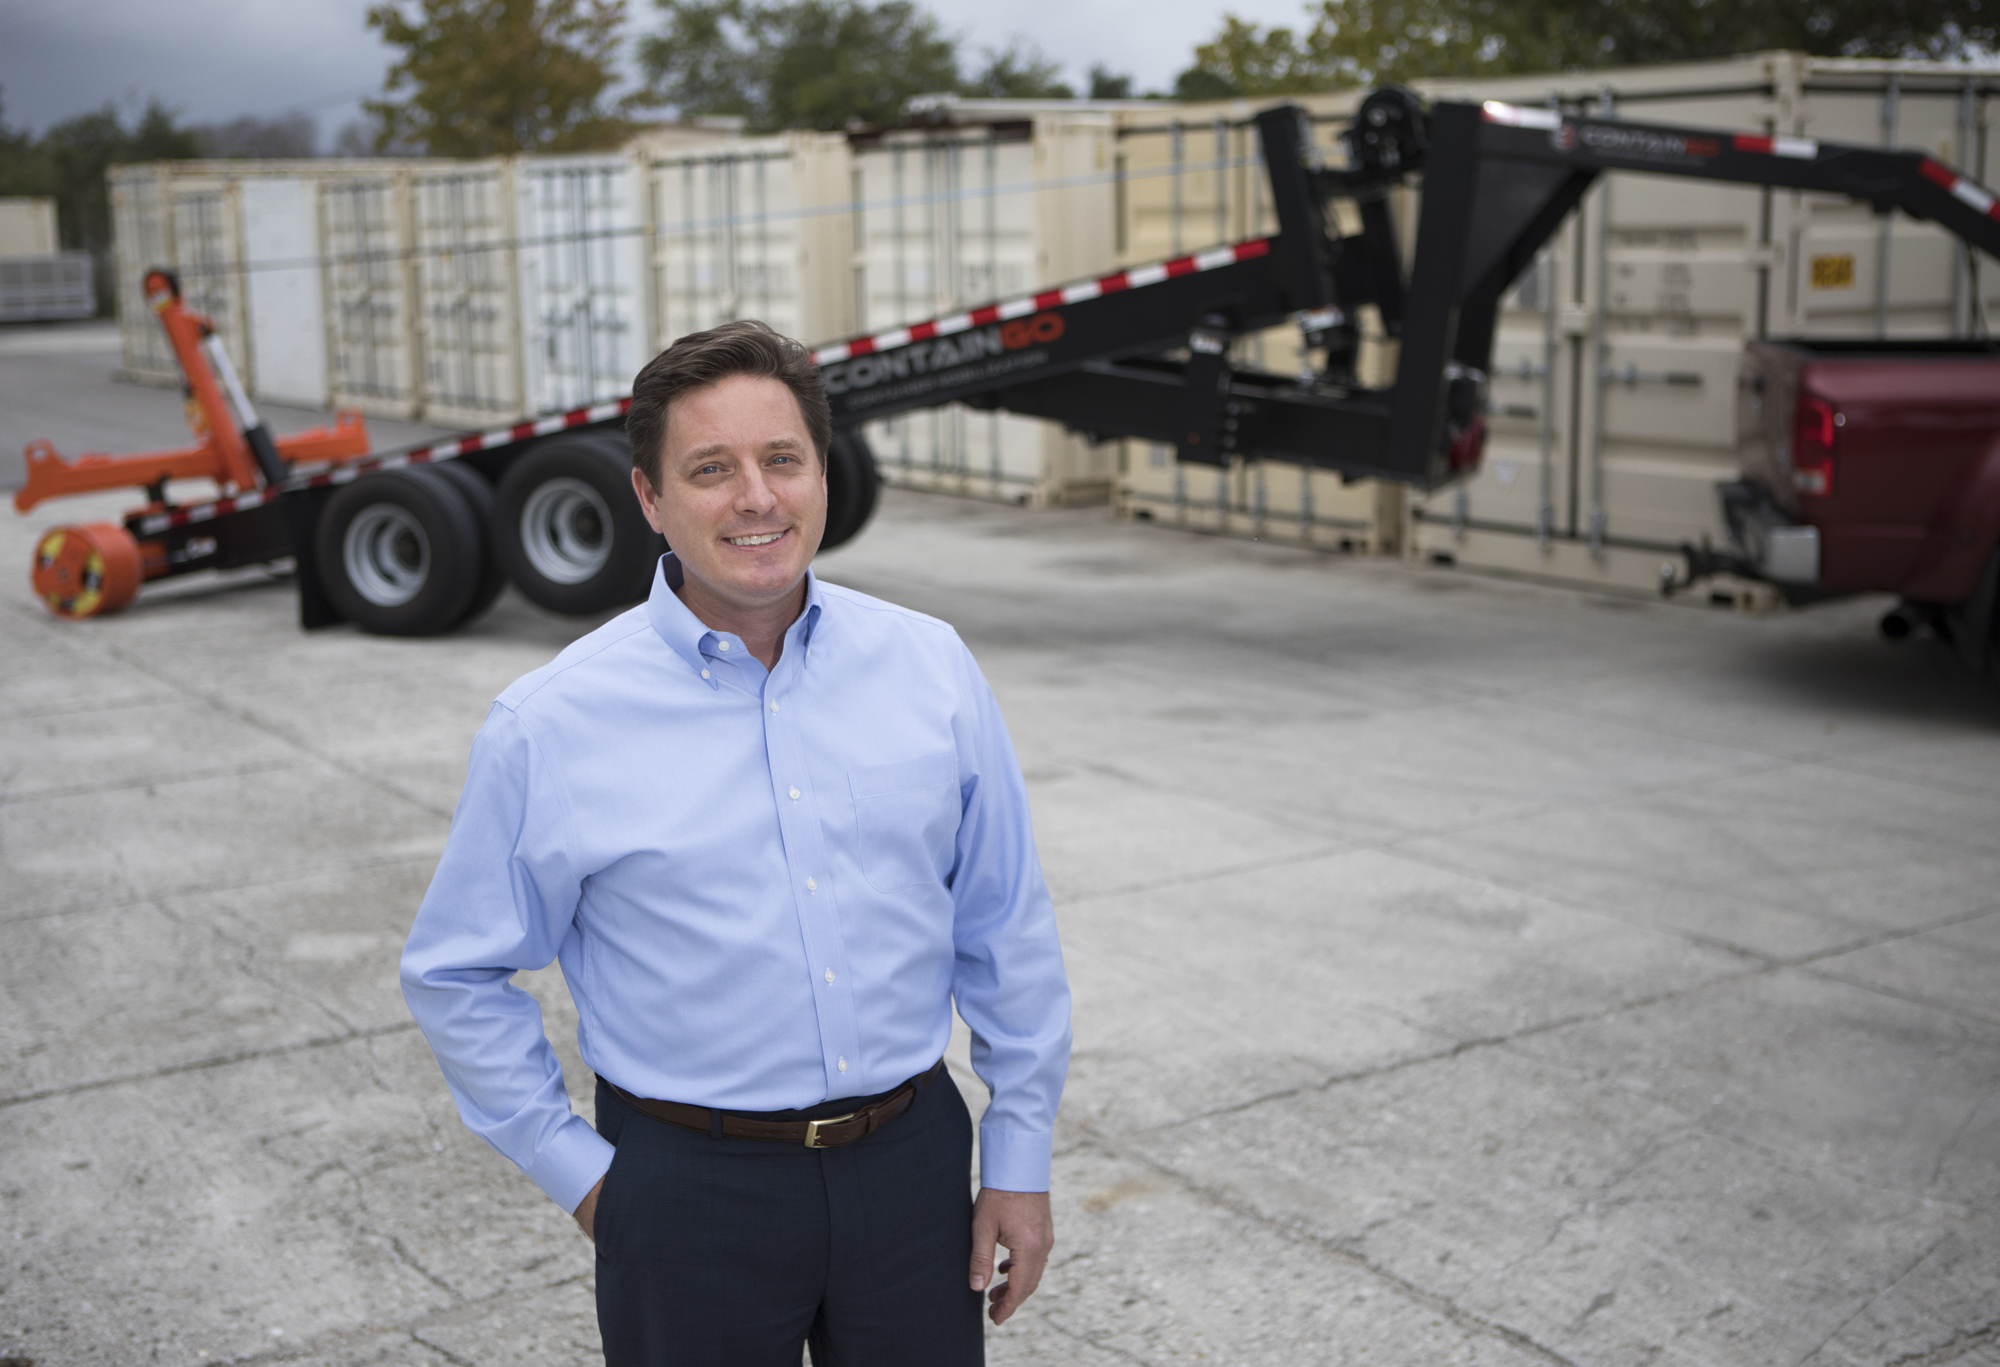 Mark Wemple. Kevin Foust was recently named CEO of ContainGo, which recently introduced a pioneering logistics product, the ContainGo Mobilizer Trailer.